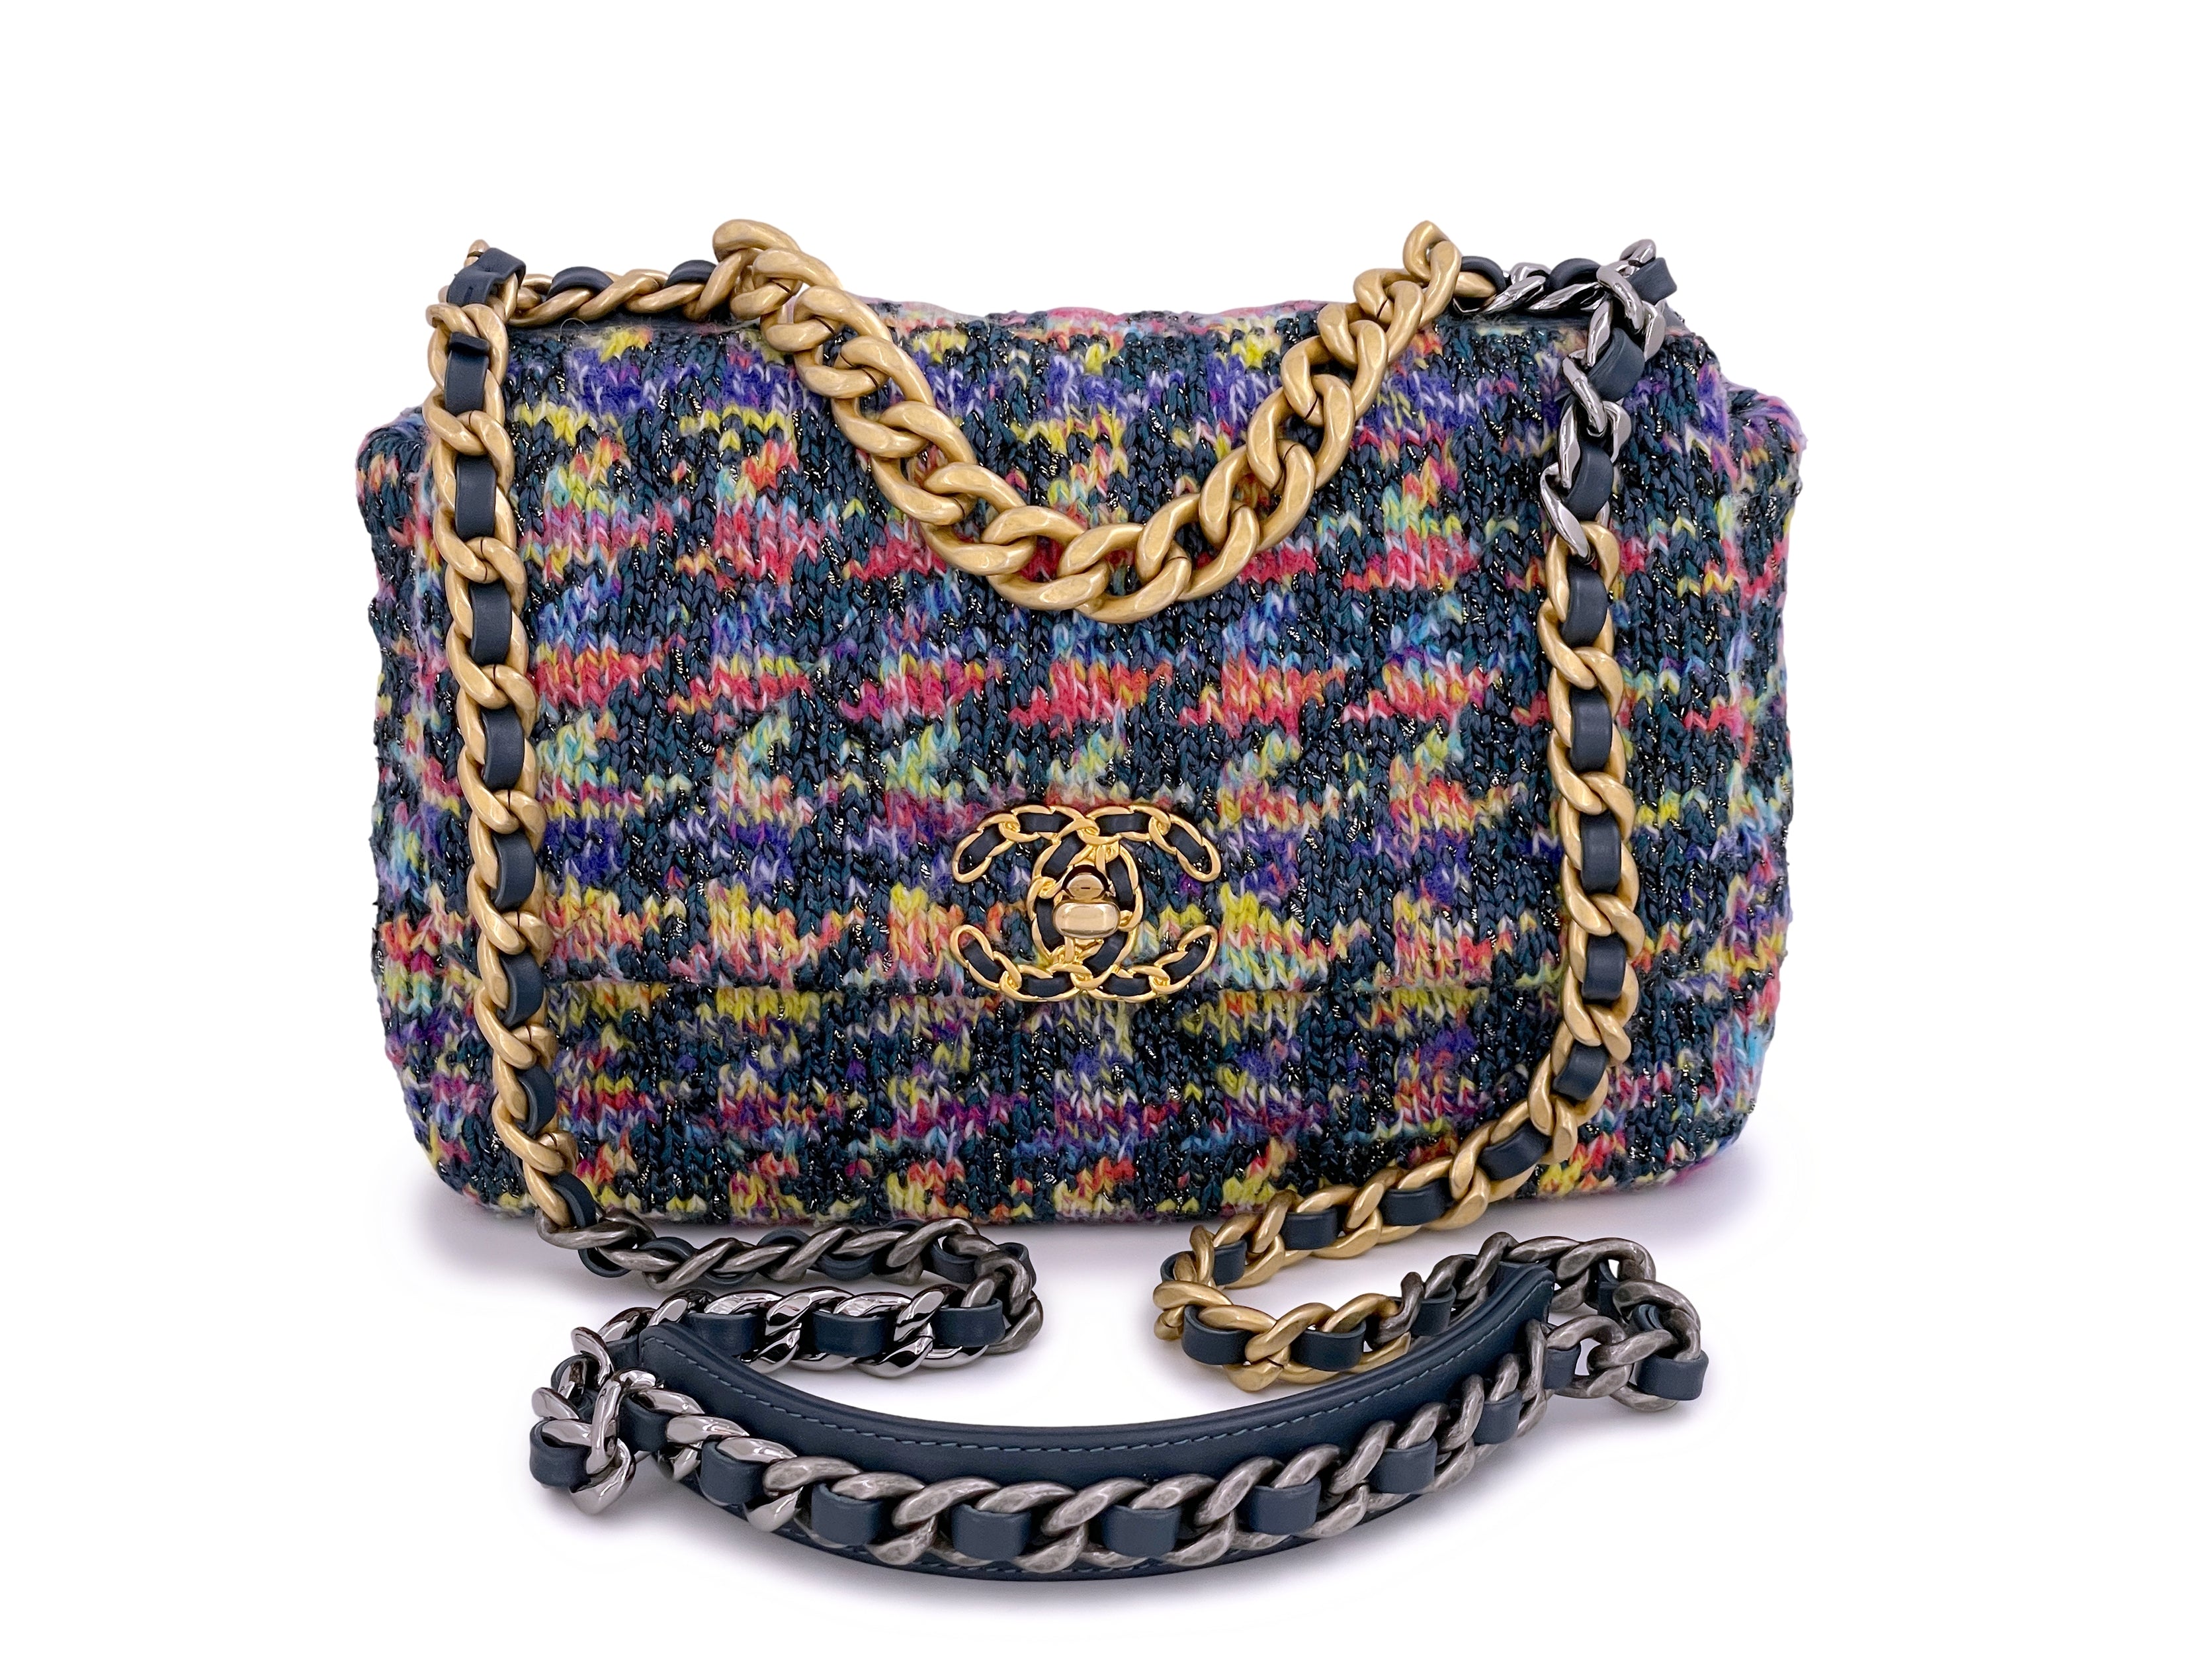 Chanel - Authenticated Timeless/Classique Handbag - Tweed Multicolour for Women, Never Worn